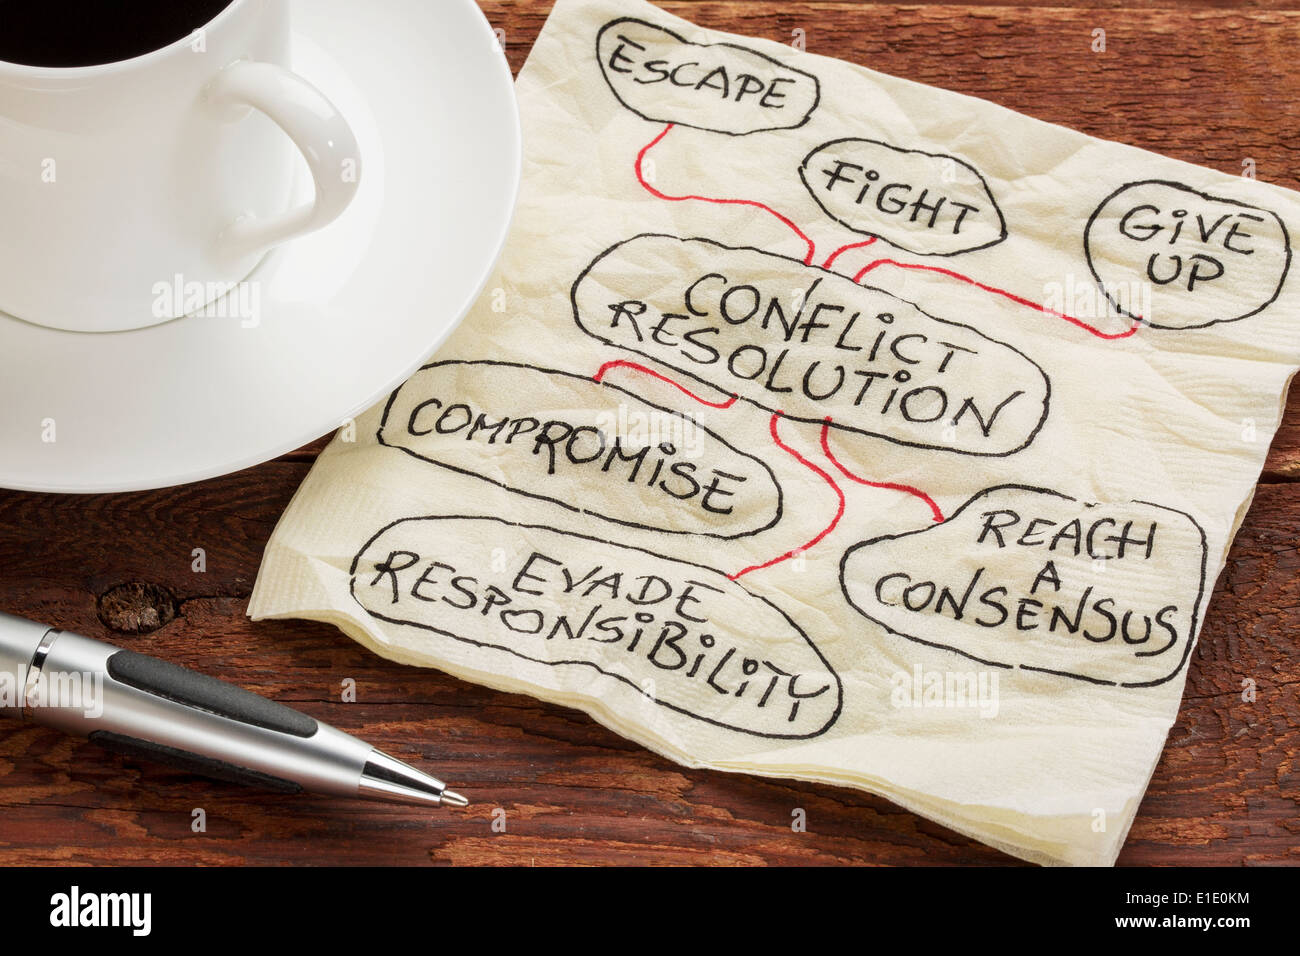 conflict resolution strategies - sketch on a cocktail napkin with a cup of coffee Stock Photo